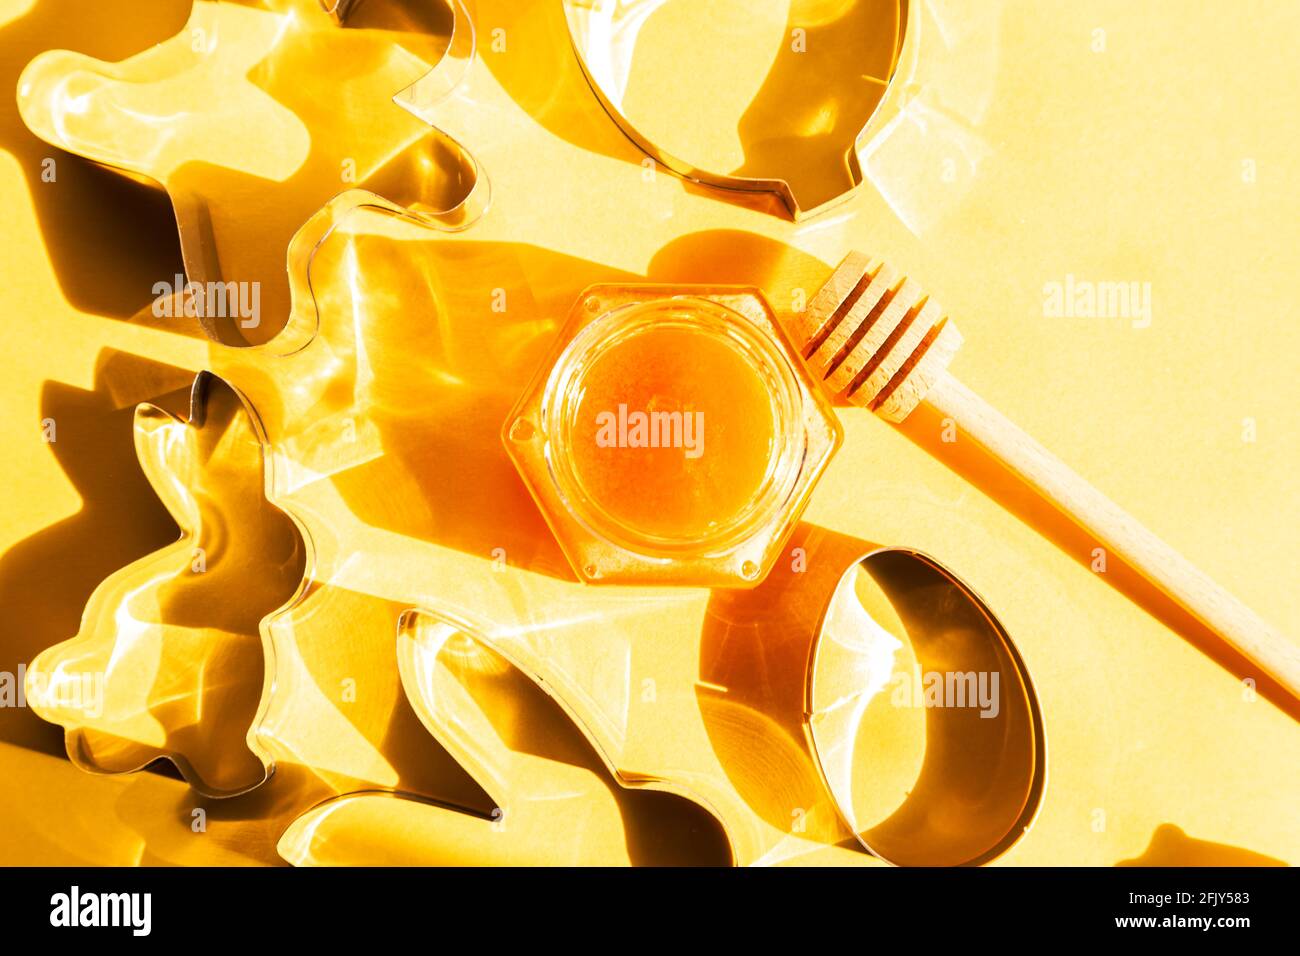 Honey jar, honey dipper and cookie cutters on yellow background. Preparing to bake cookies. Bright sunshine Stock Photo